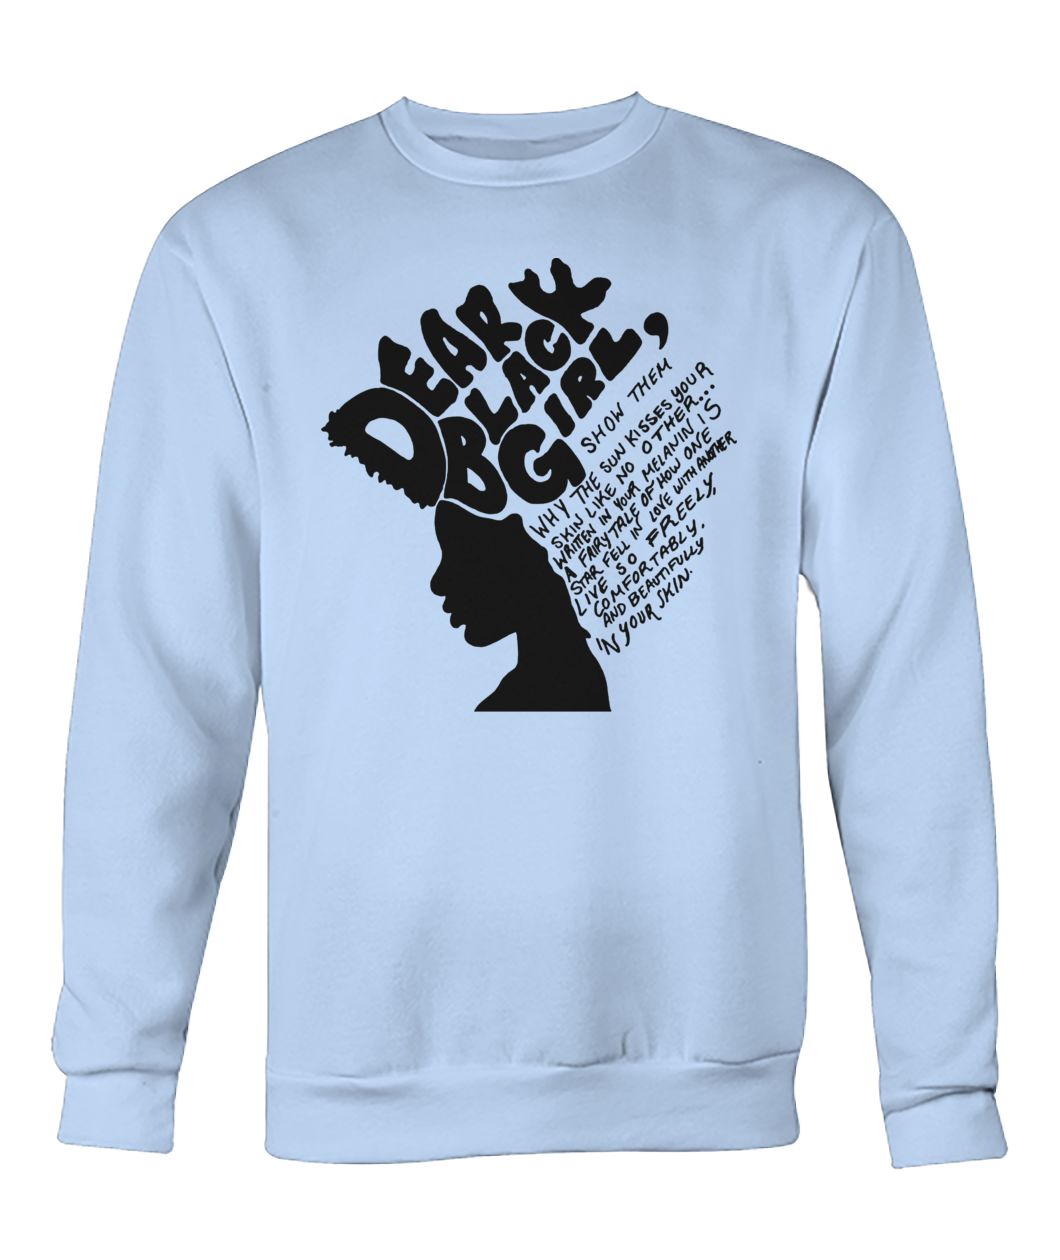 Dear black girl show them why the sun kisses your skin like no other crew neck sweatshirt